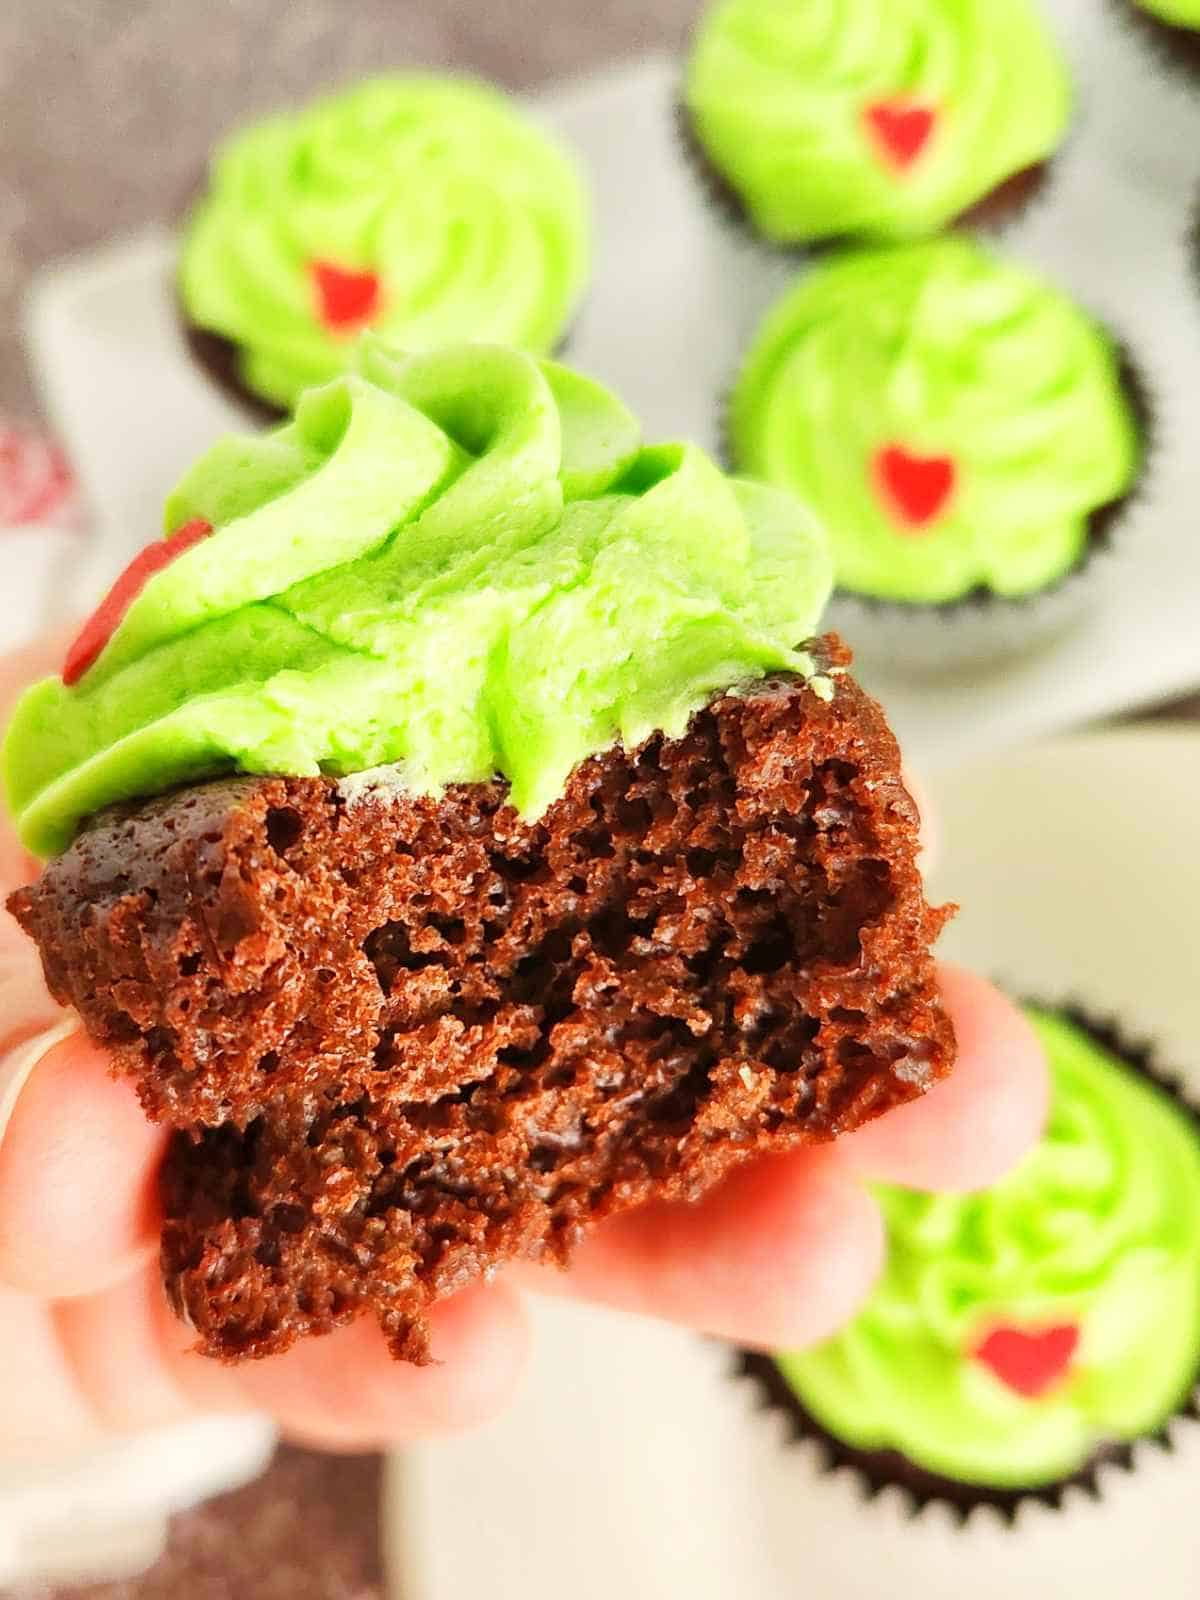 holding unwrapped Grinch cupcake with a bite out of it.